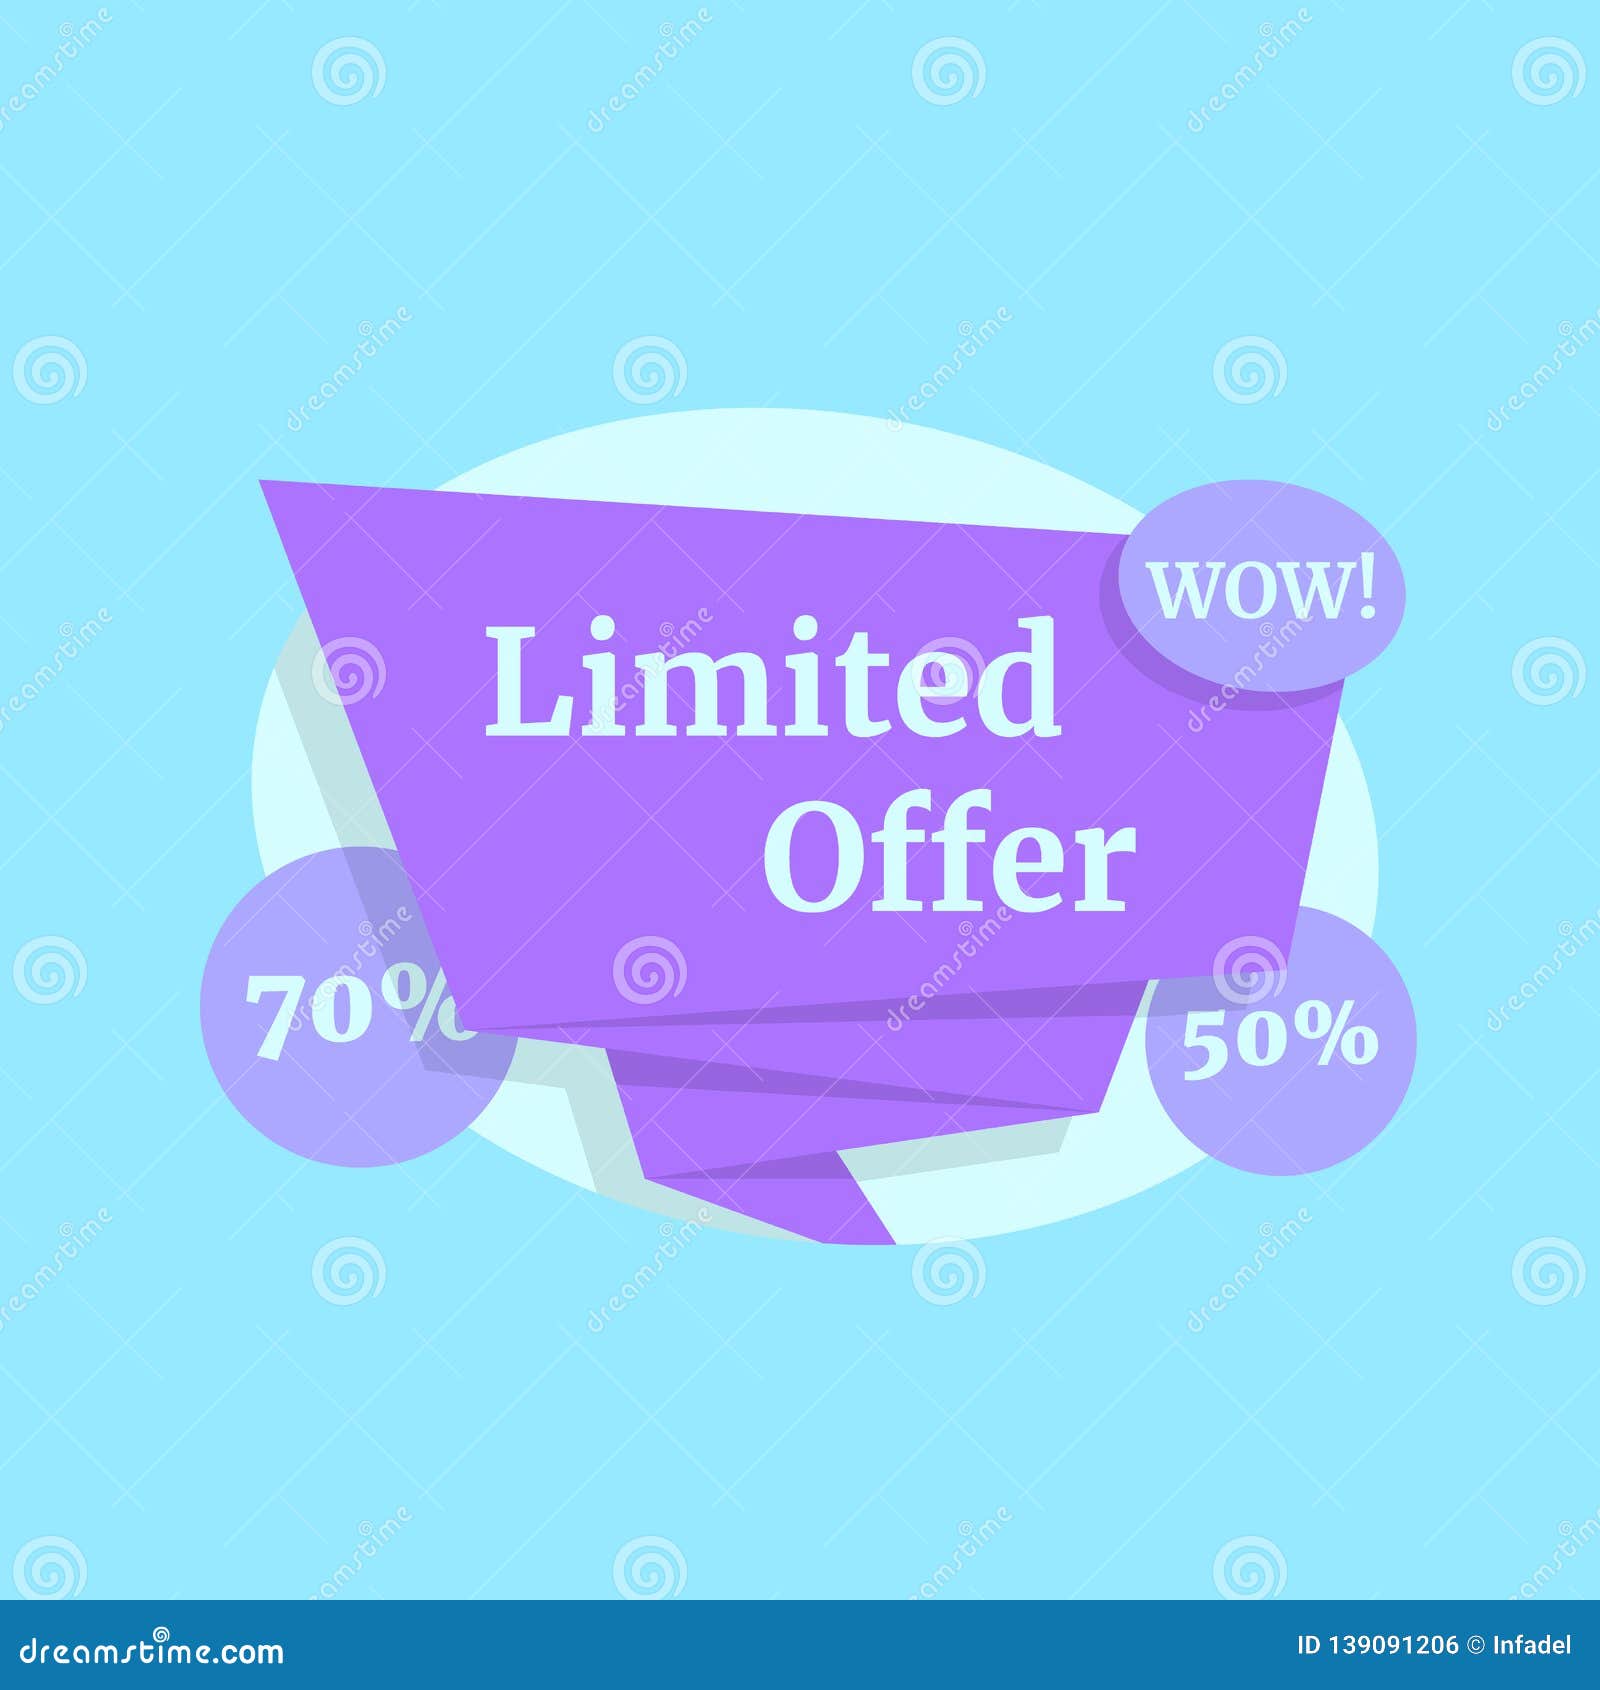 Limited Offer Color Label Like Wow Sale Stock Vector - Illustration of closeout, rebate: 139091206